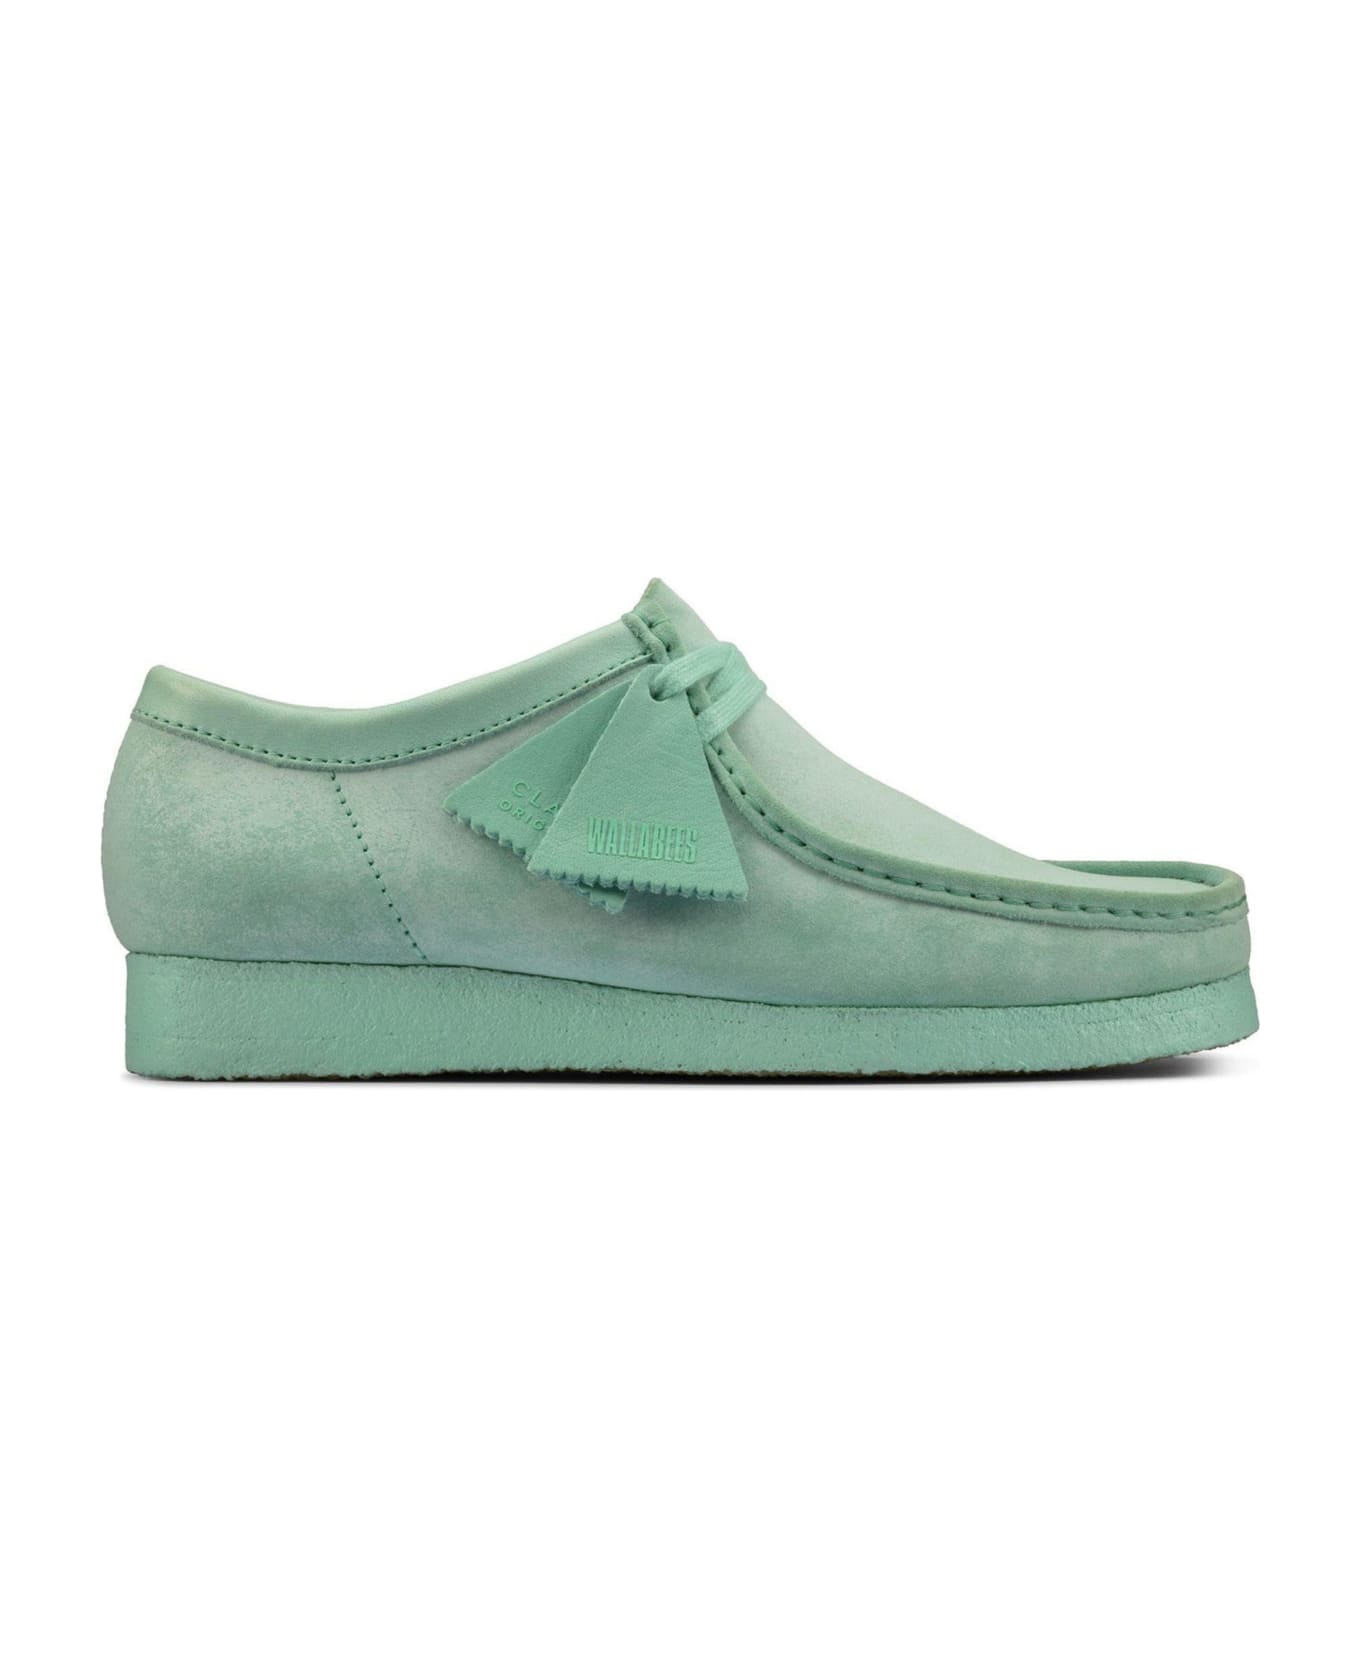 Clarks Wallabe Leather Loafers - Green